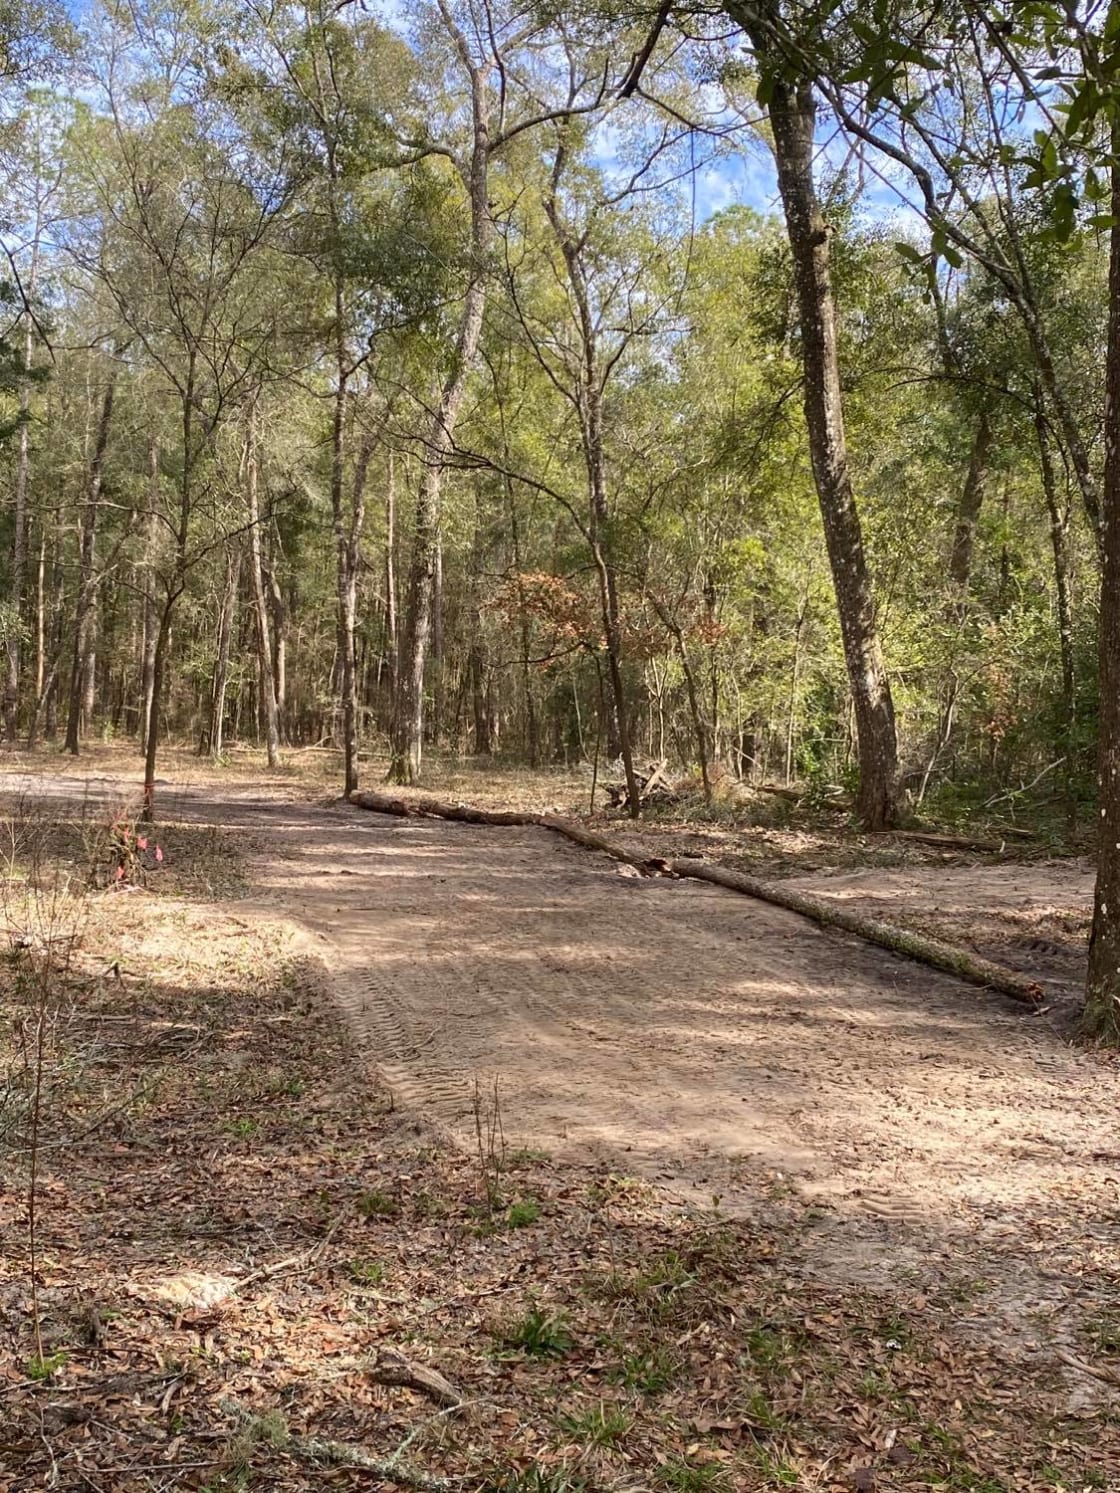 New driveway to primitive camping area at the rear of the property.